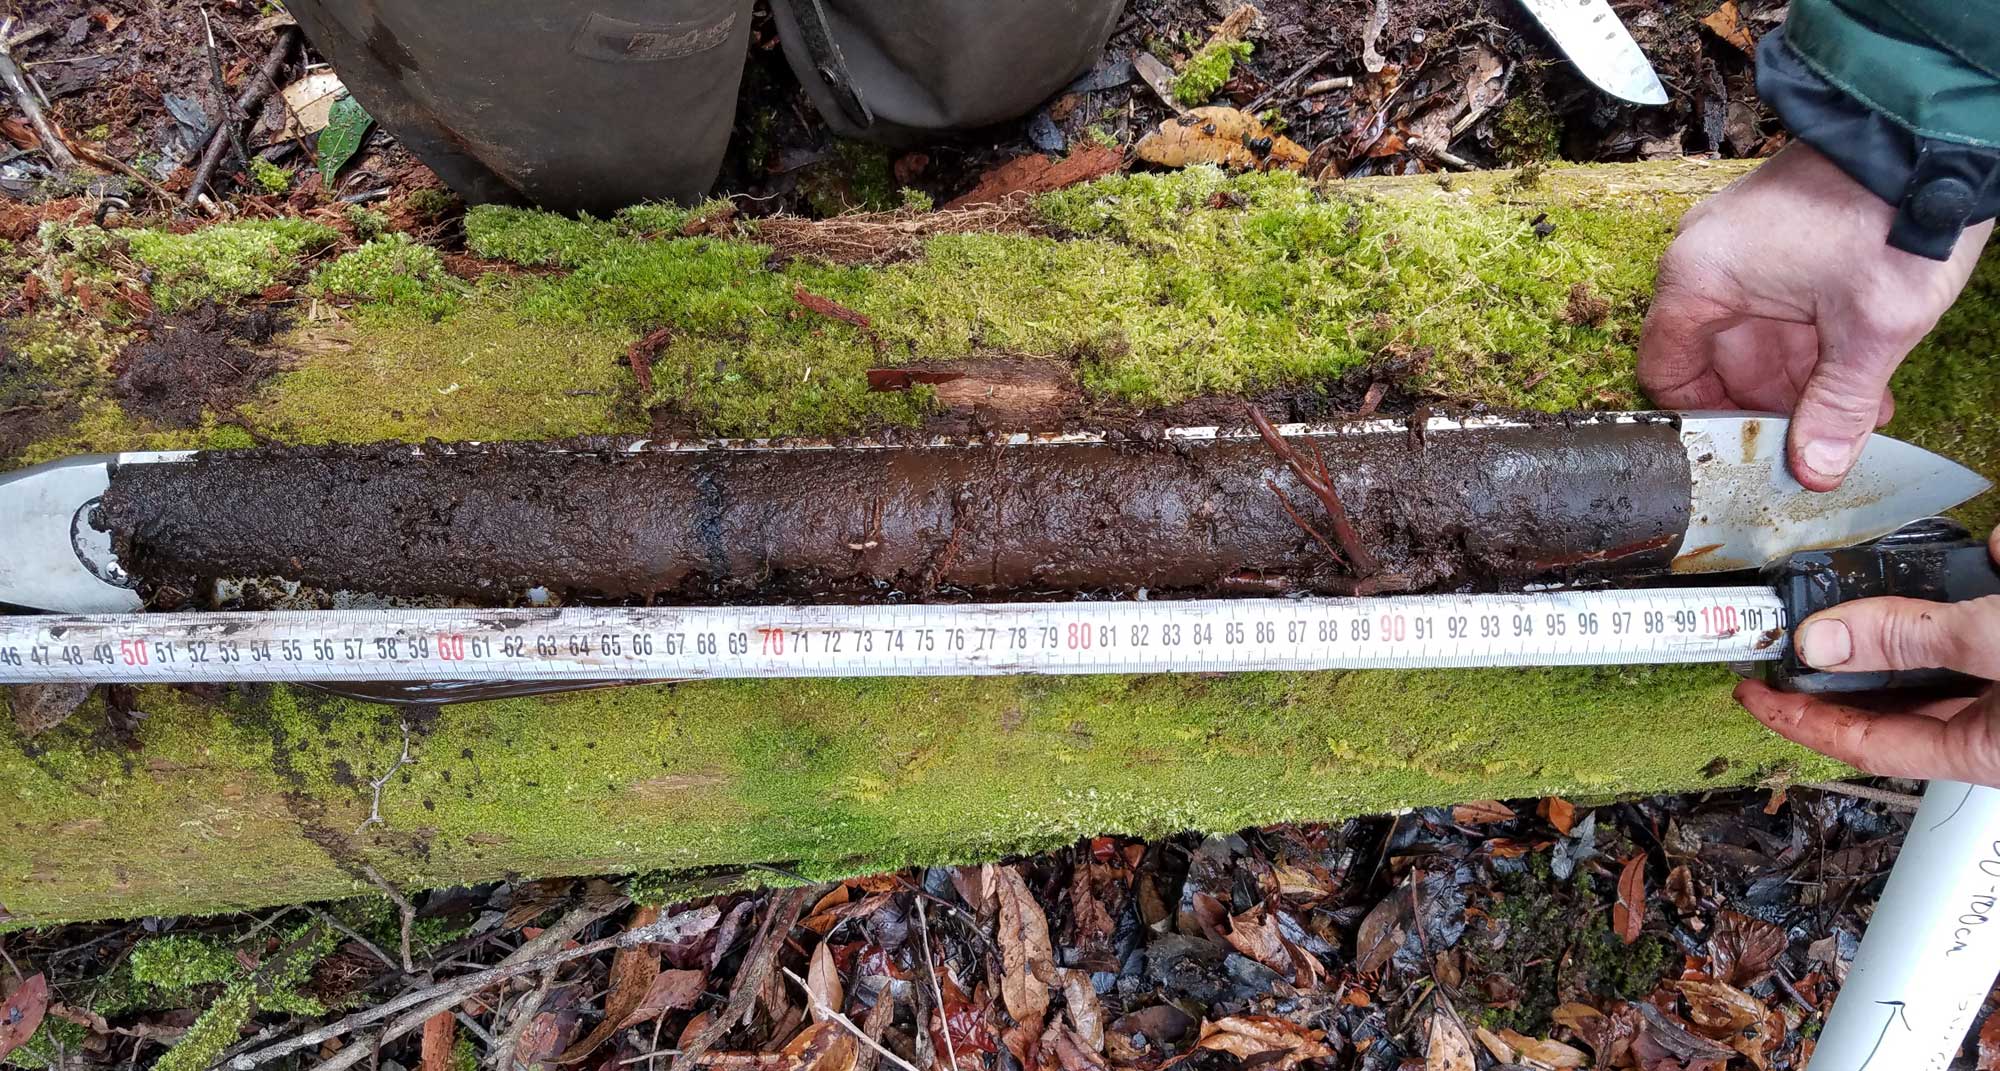 Photograph of a peat core from the Great Dismal Swamp in a Russian corer with a ruler showing the length.